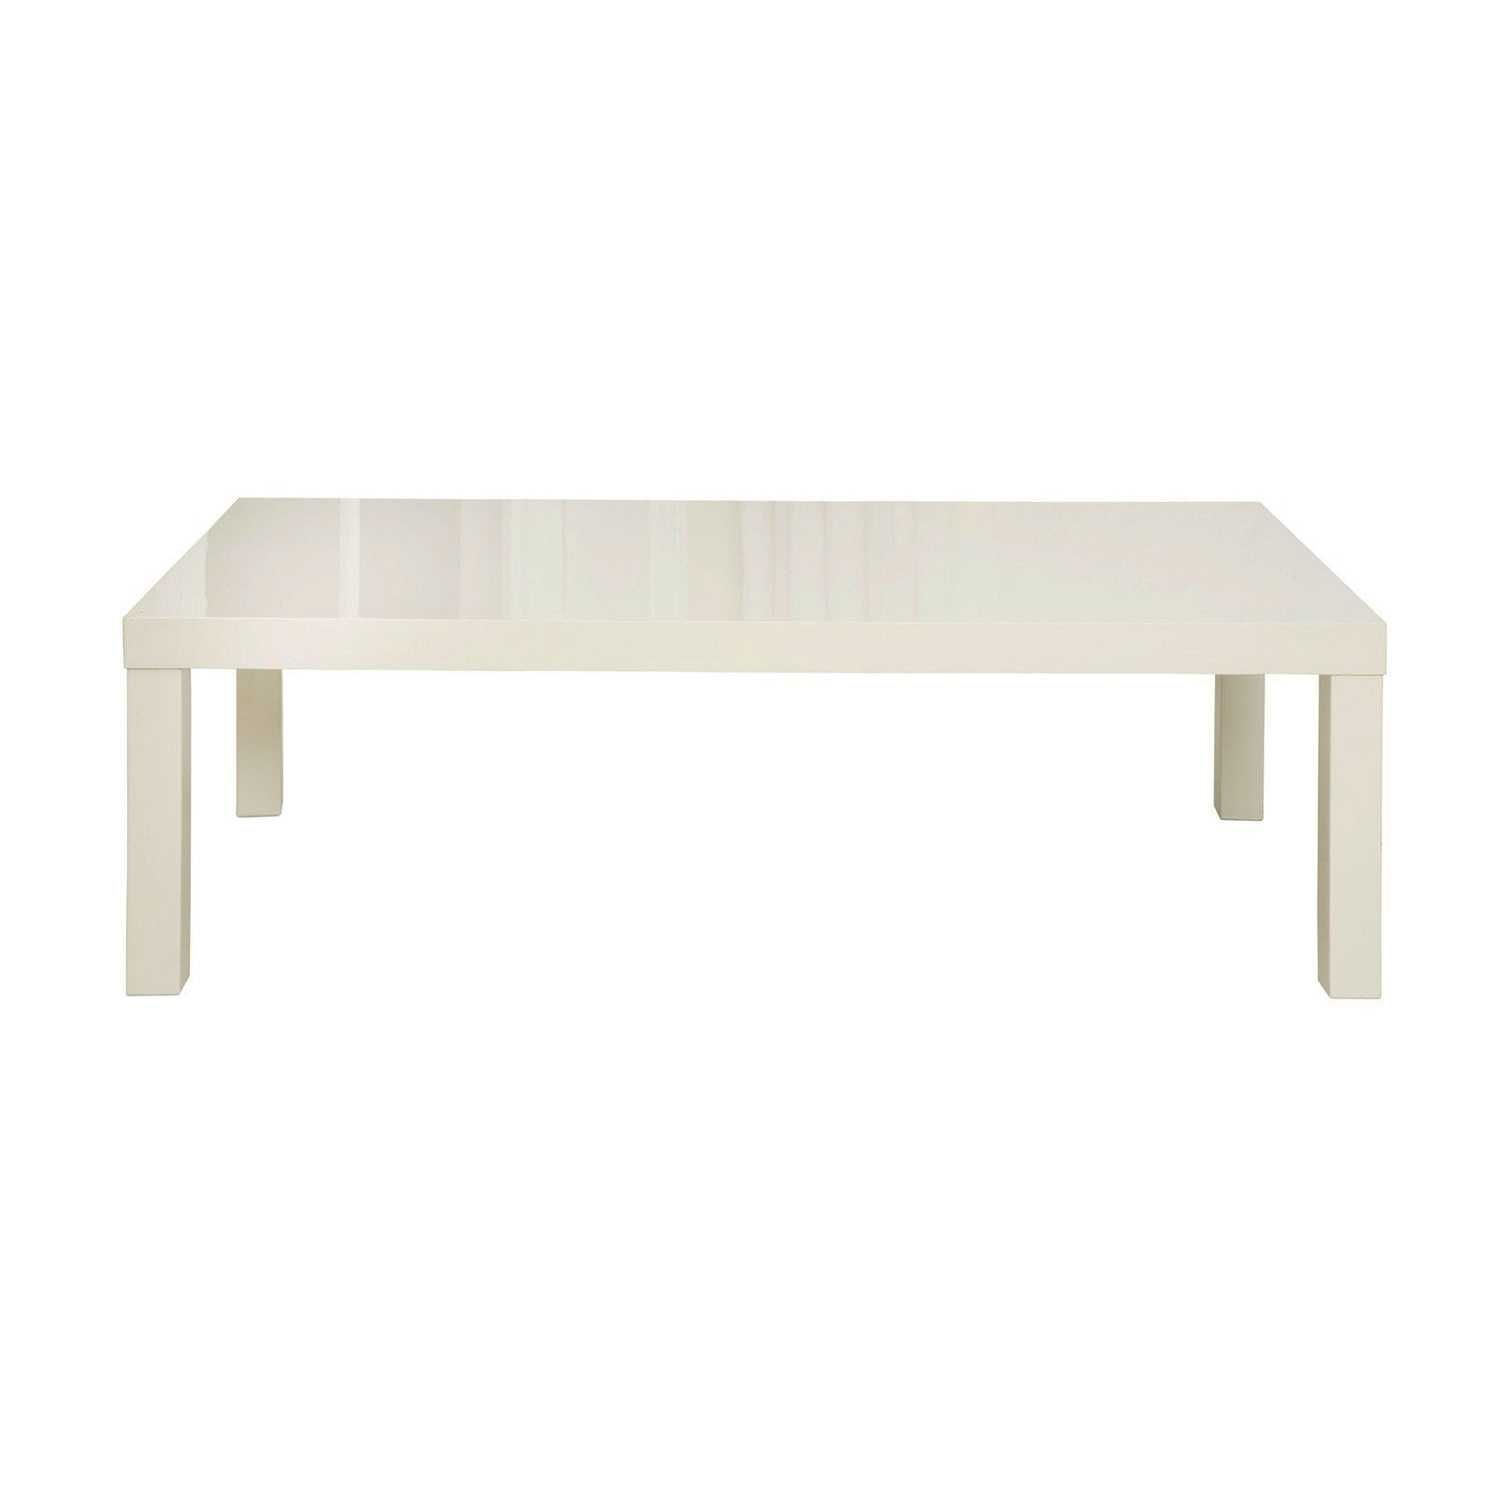 Puro Cream Coffee Table | The Range | Office Basement | Pinterest Intended For Stack Hi Gloss Wood Coffee Tables (View 18 of 30)